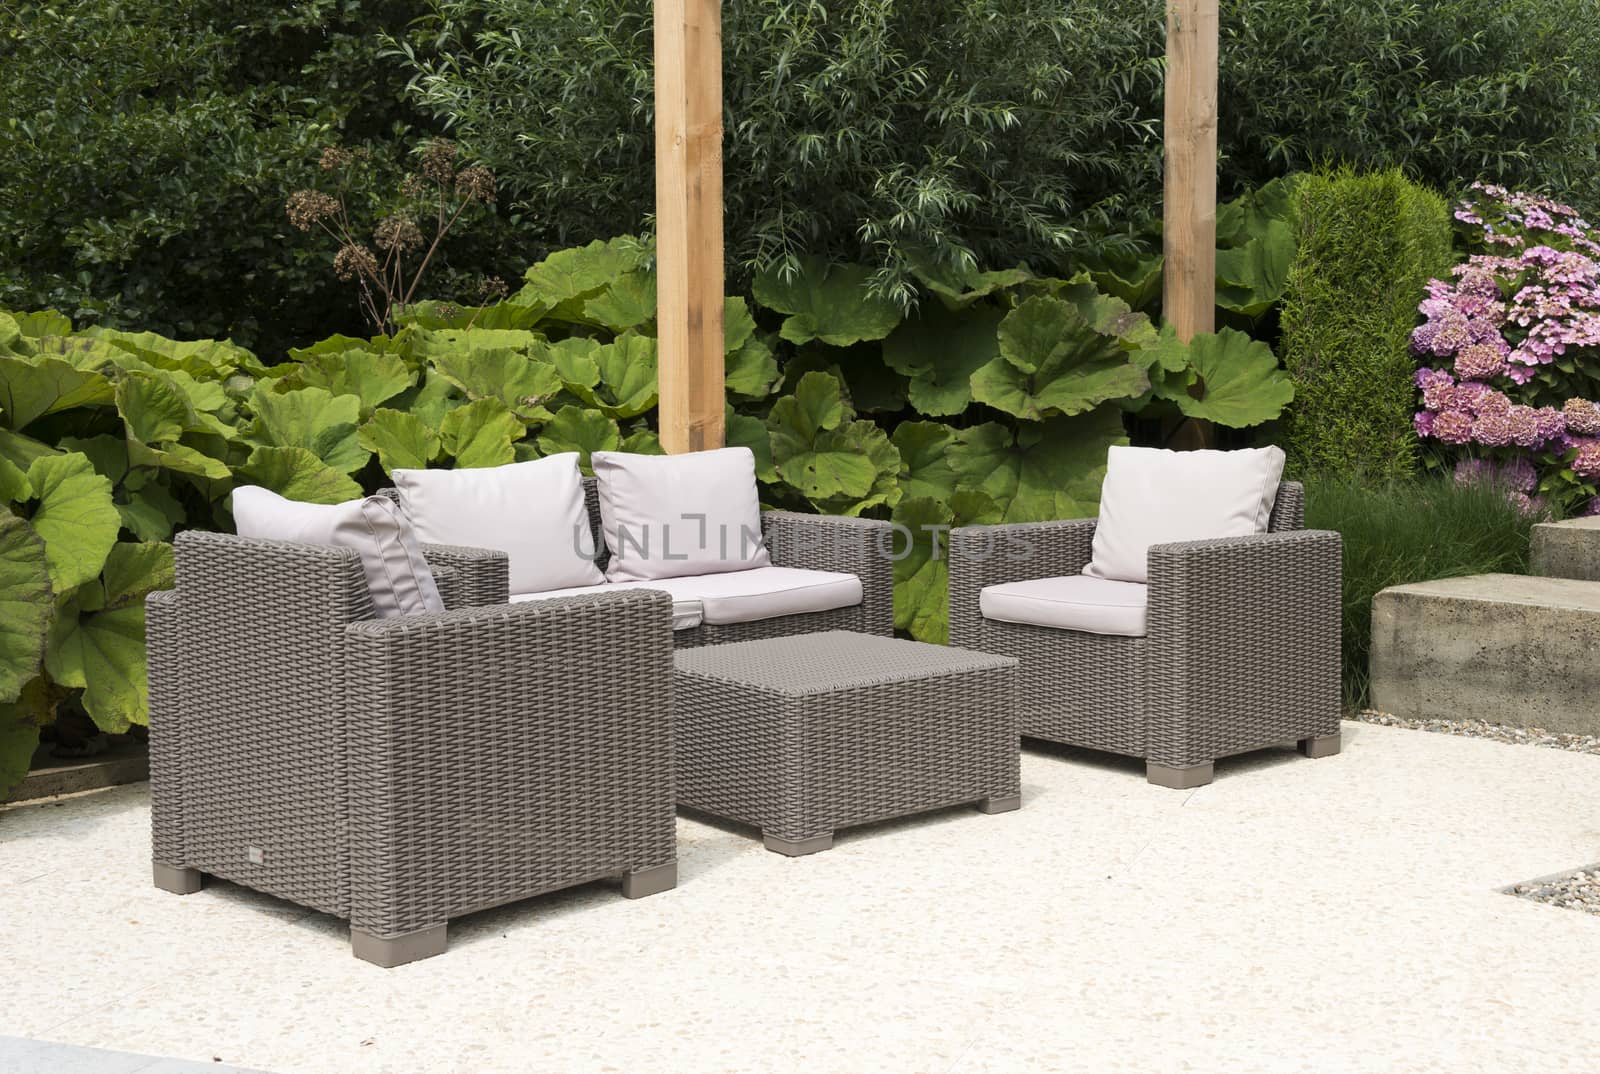 teracce with rattan relax chairs in garden